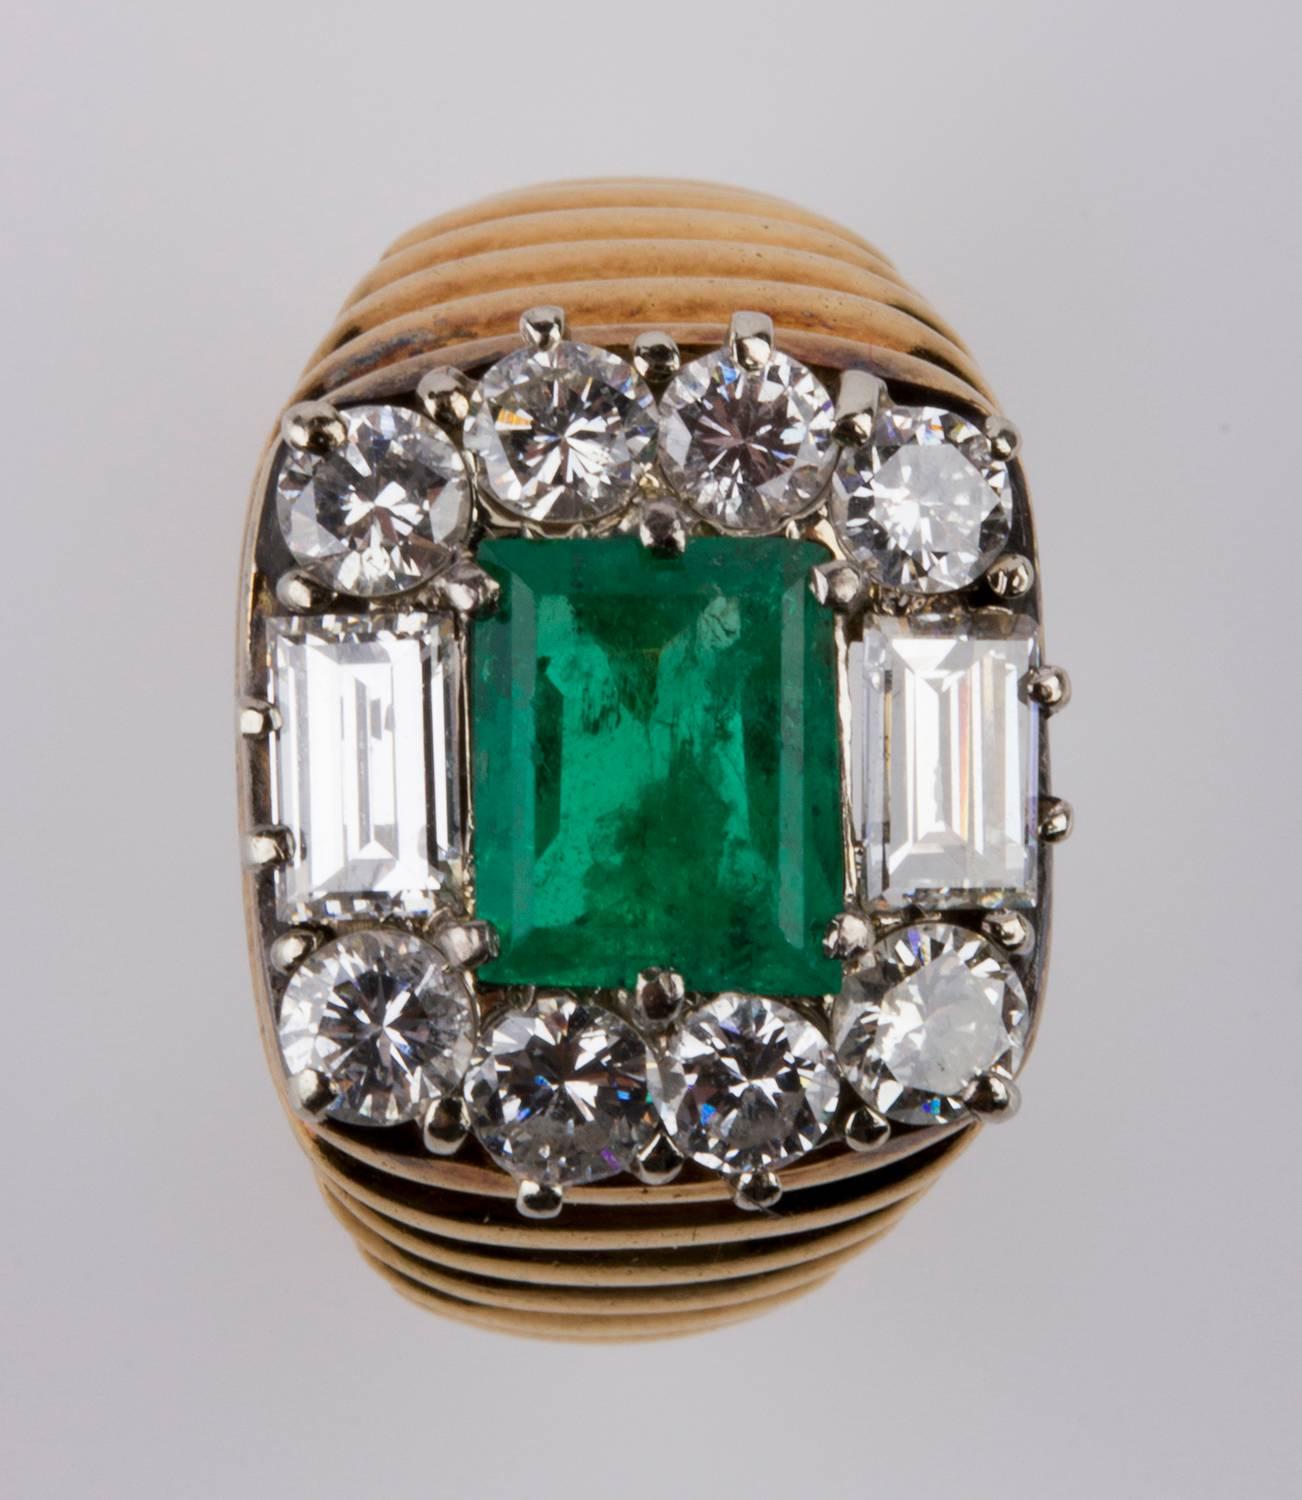 Set emerald embellished with diamond. Size US 5.5. Weight 12.7 gr.